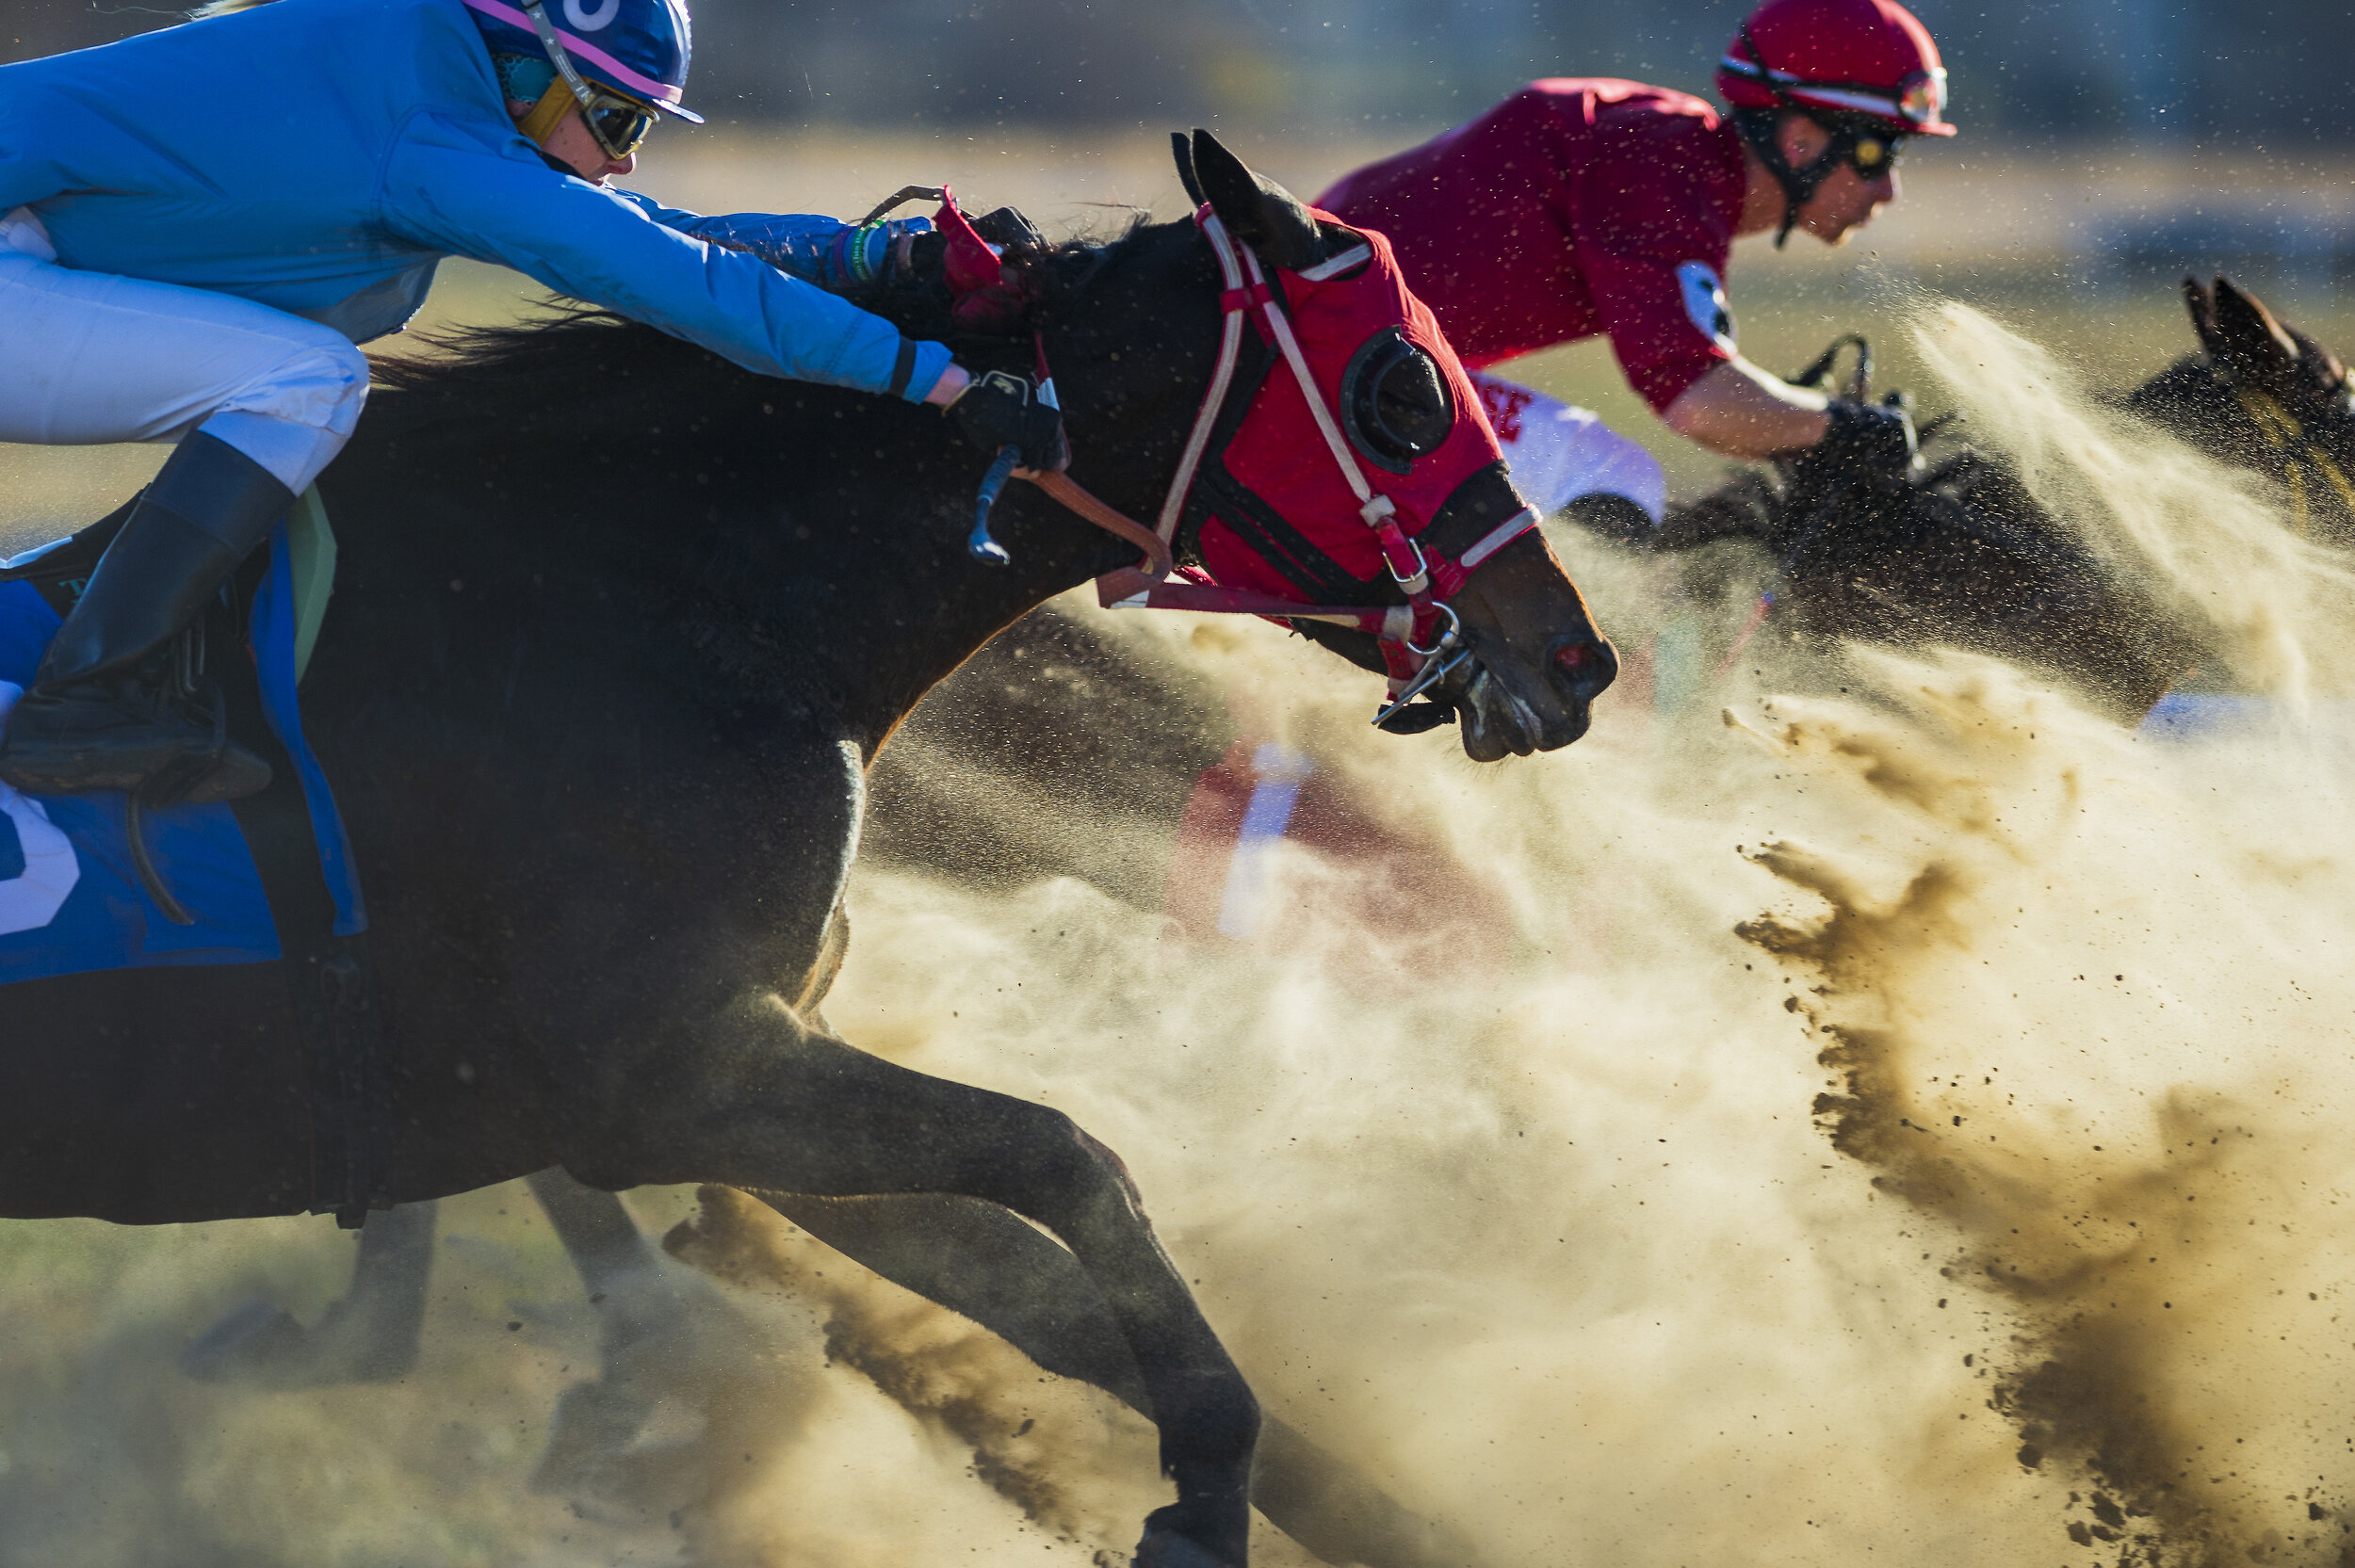  Hold Fast Kat (left), ridden by Tara Hynes, battles for position against Final Affair, ridden by Jake Olesiak, on the final day of live horse racing at the Lincoln Race Course on Monday, November 02, 2020, in Lincoln, Nebraska. KENNETH FERRIERA, JOU